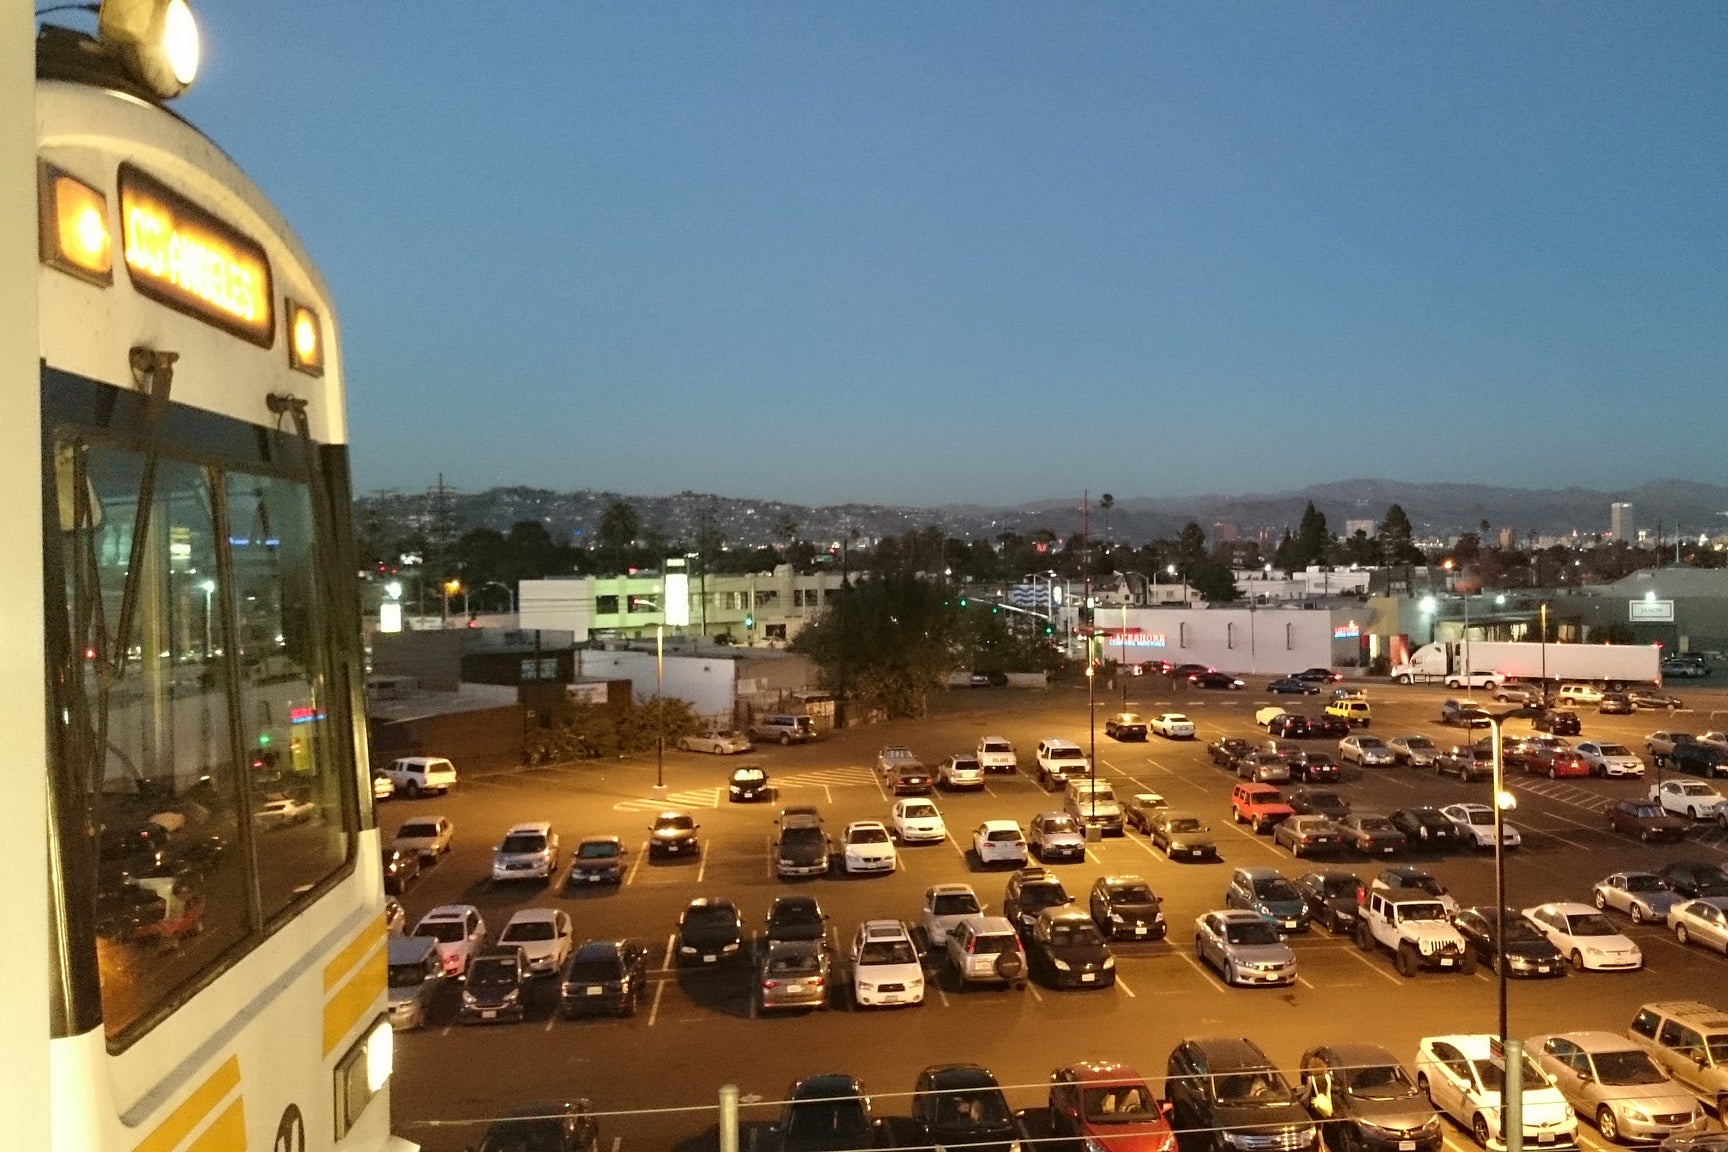 A parking lot near the Los Angeles Expo Line.